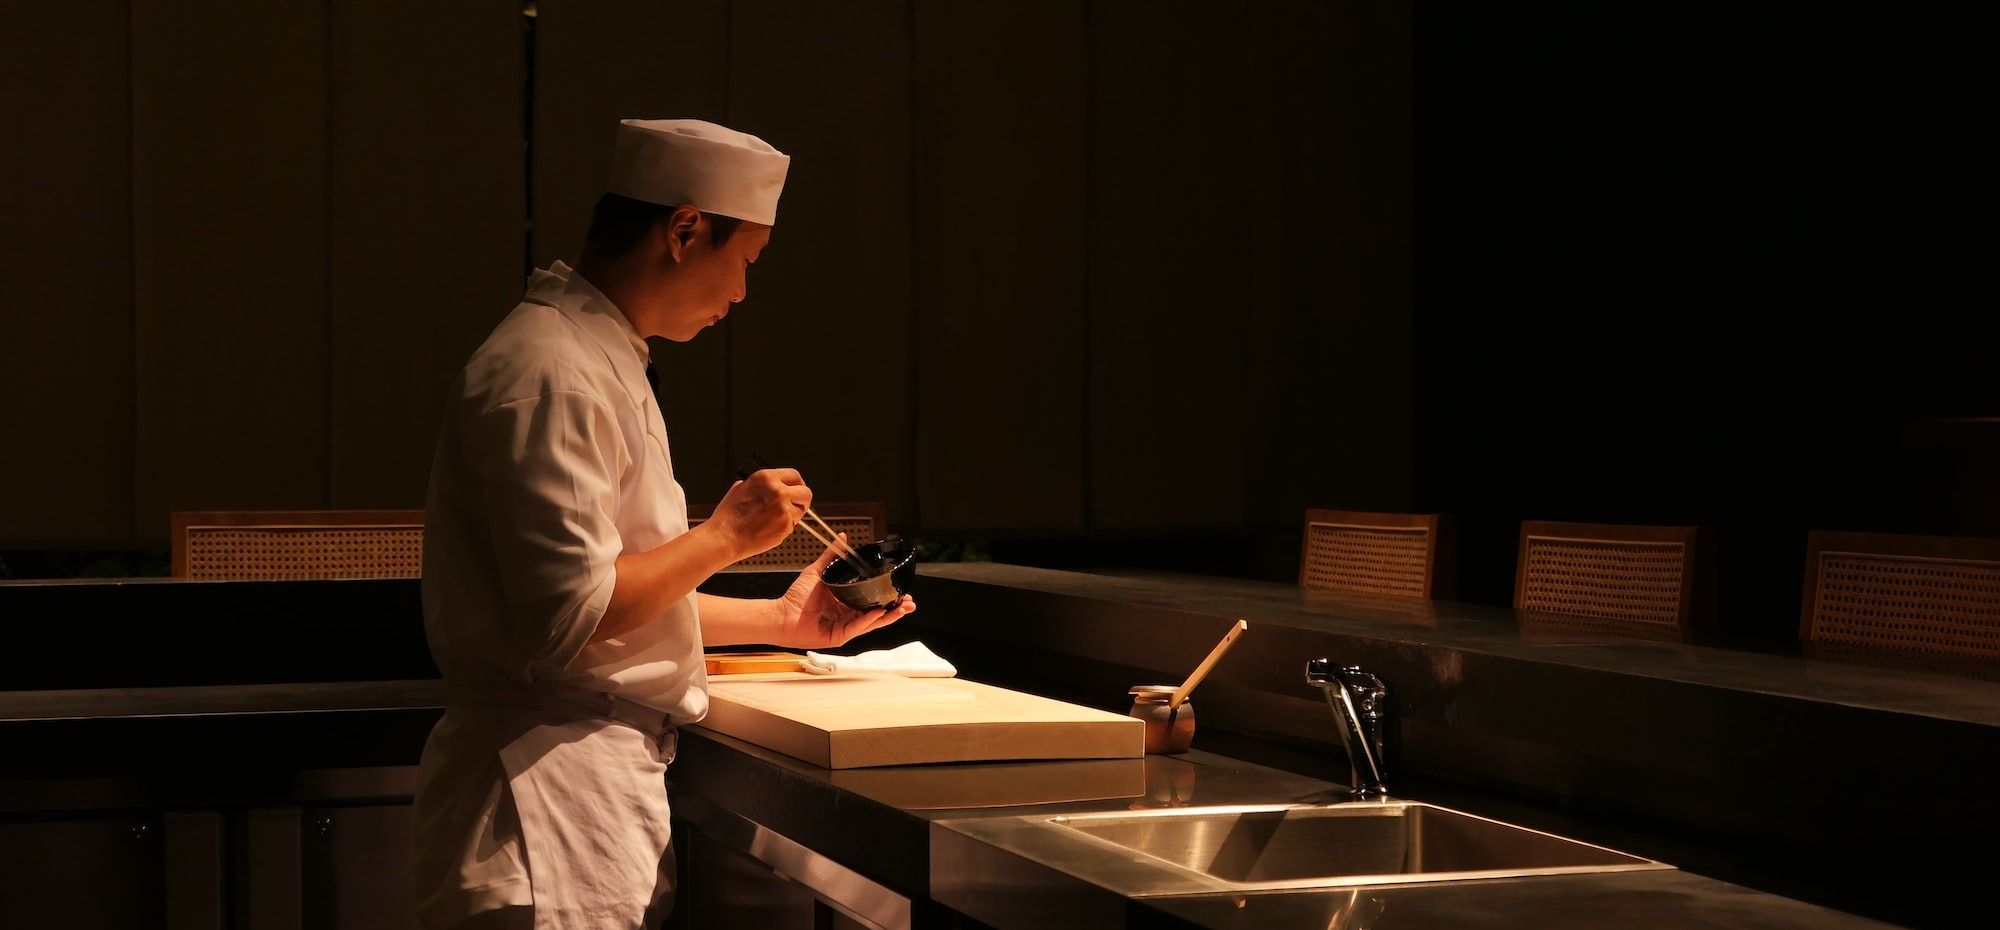 Japanese chef in the kitchen preparing dishes